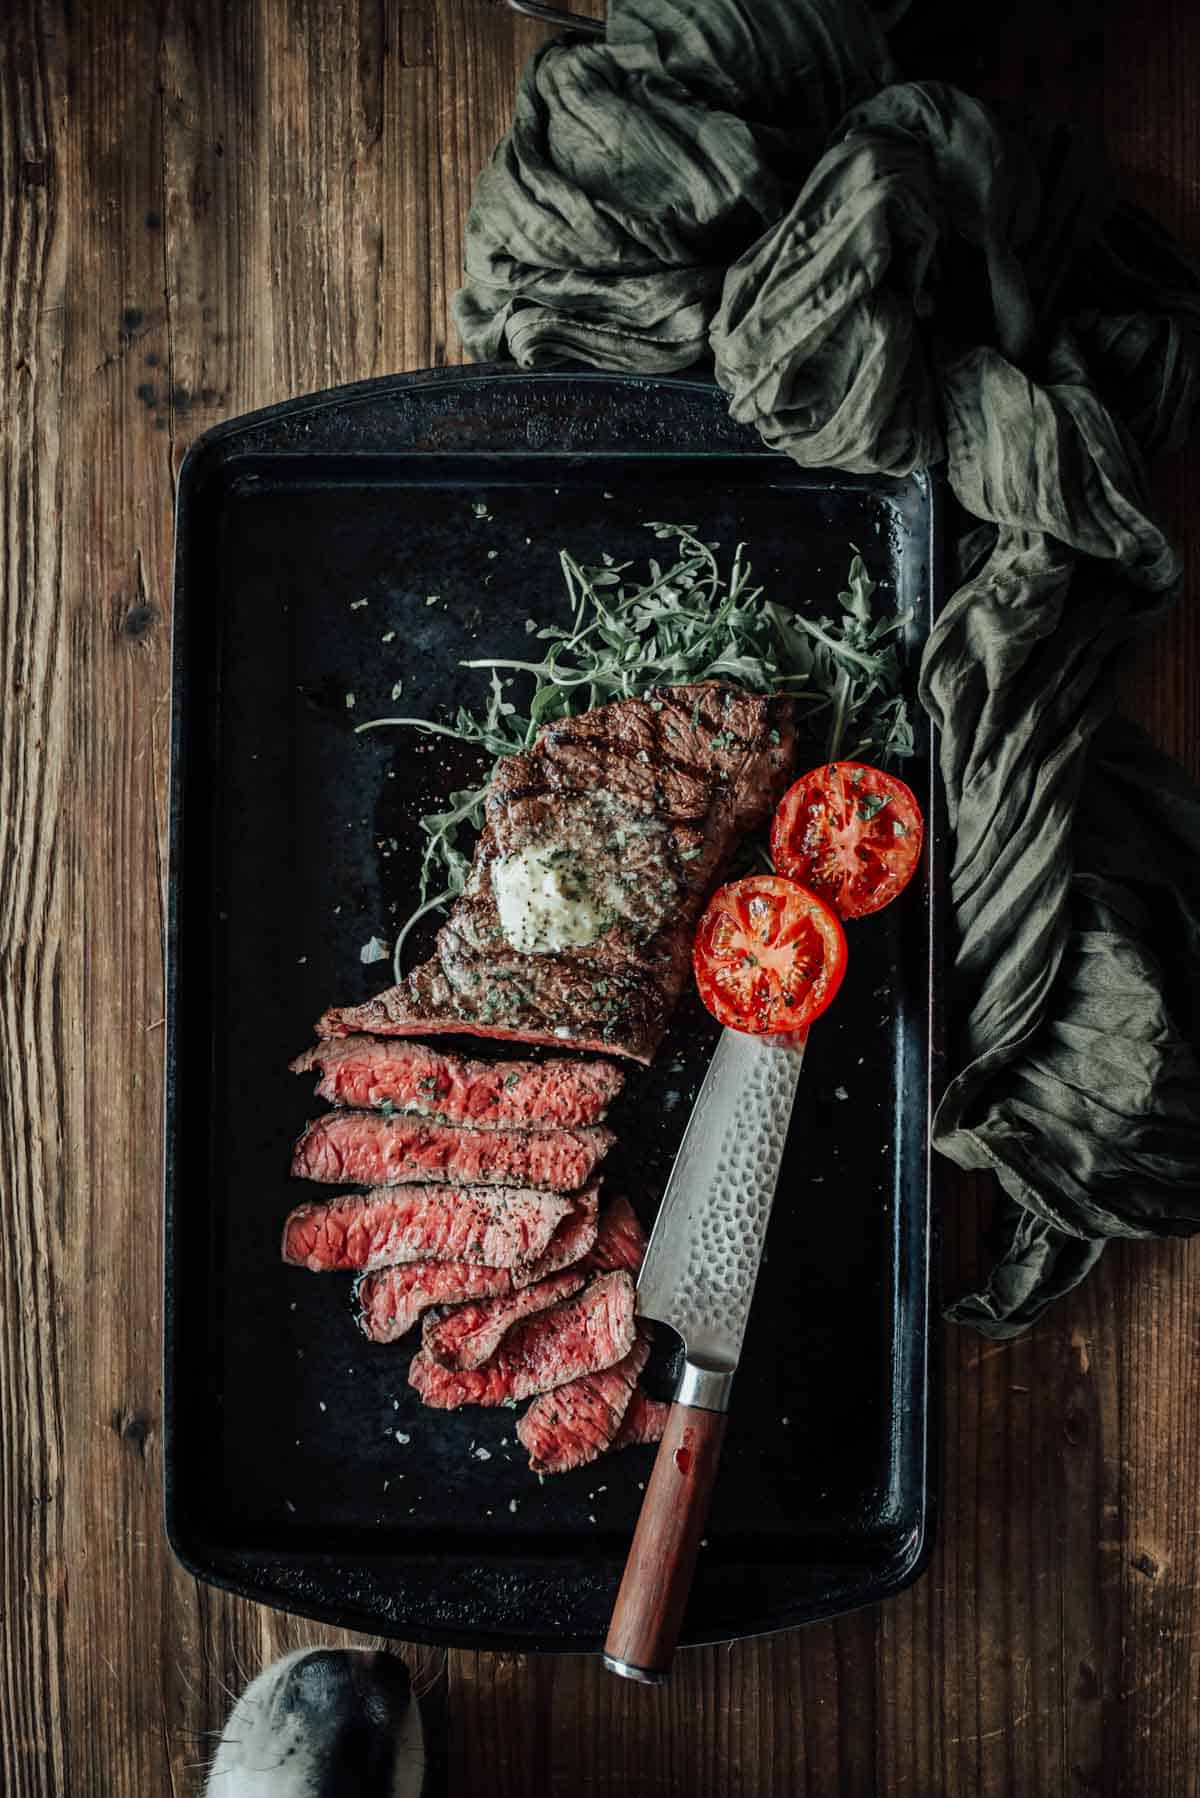 A grilled london broil with half sliced into pieces, garnished with a pat of butter, vegetables, and two grilled tomato halves, served on a black tray with a knife and a dogs nose sneaking in near the edge for a sniff.